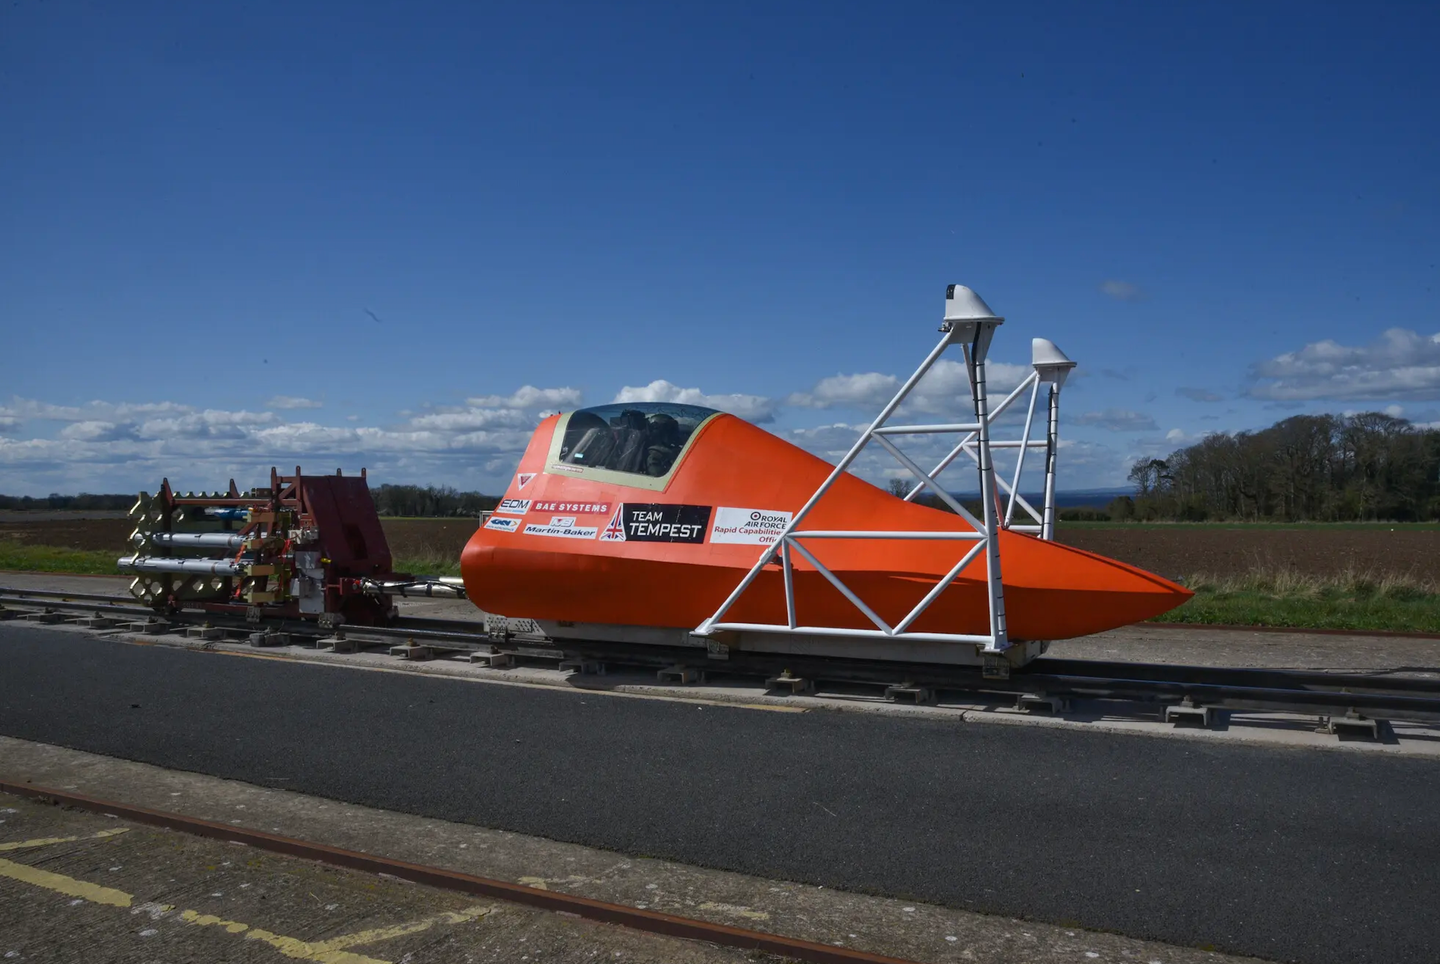 The “representative forward fuselage design” used for ejection tests, coupled to the rocket sled. <em>BAE Systems</em>